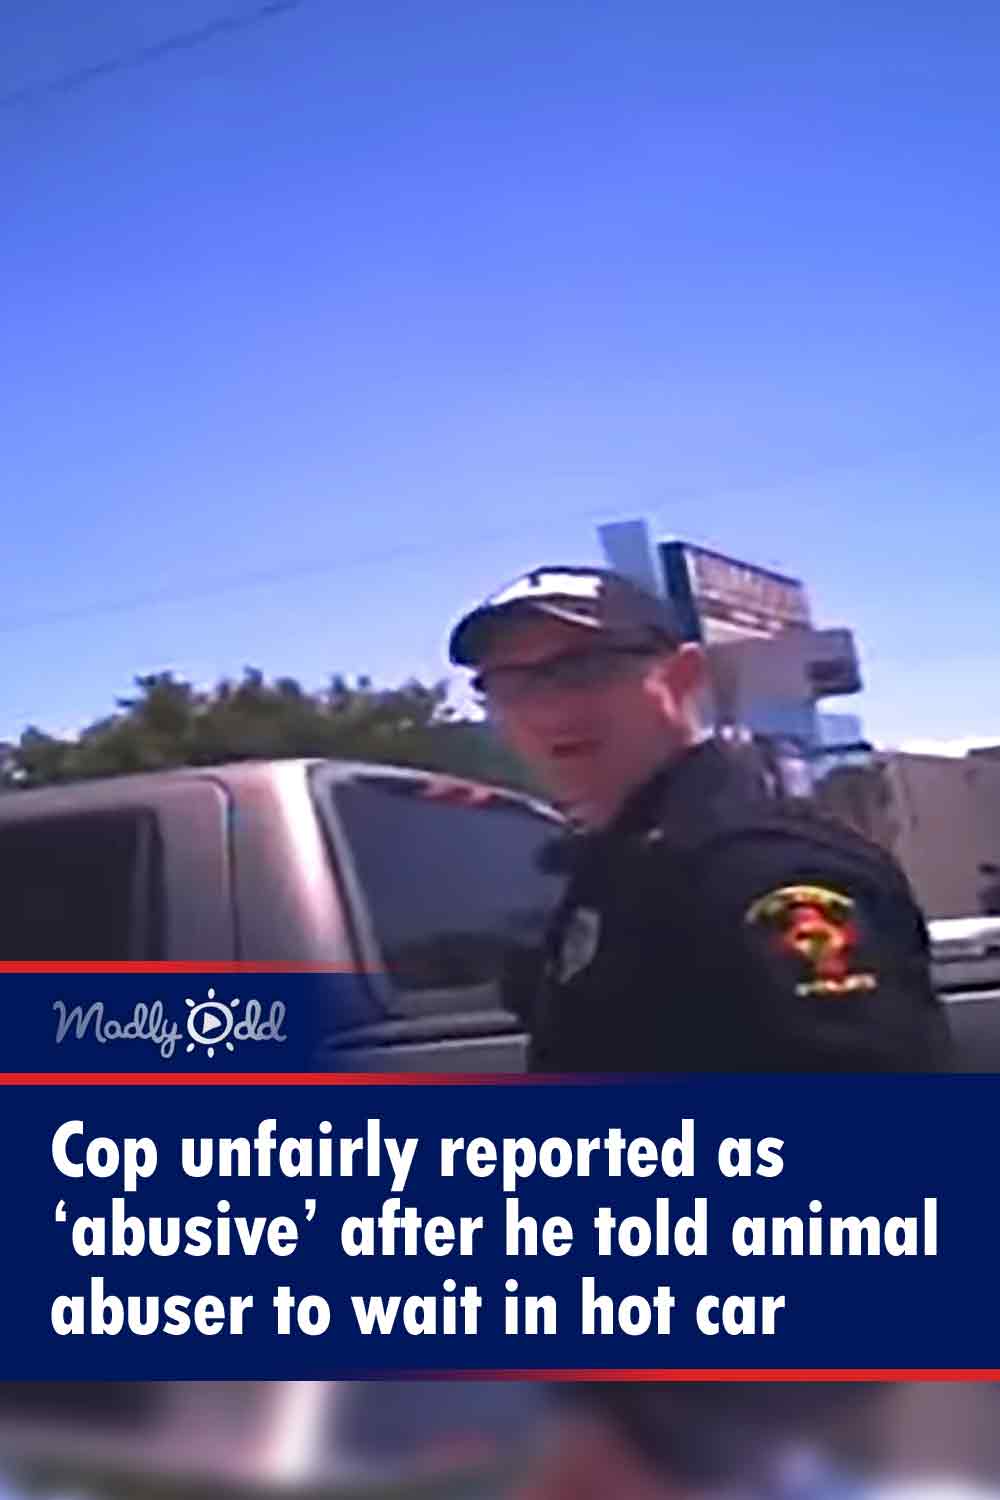 Cop unfairly reported as ‘abusive’ after he told animal abuser to wait in hot car